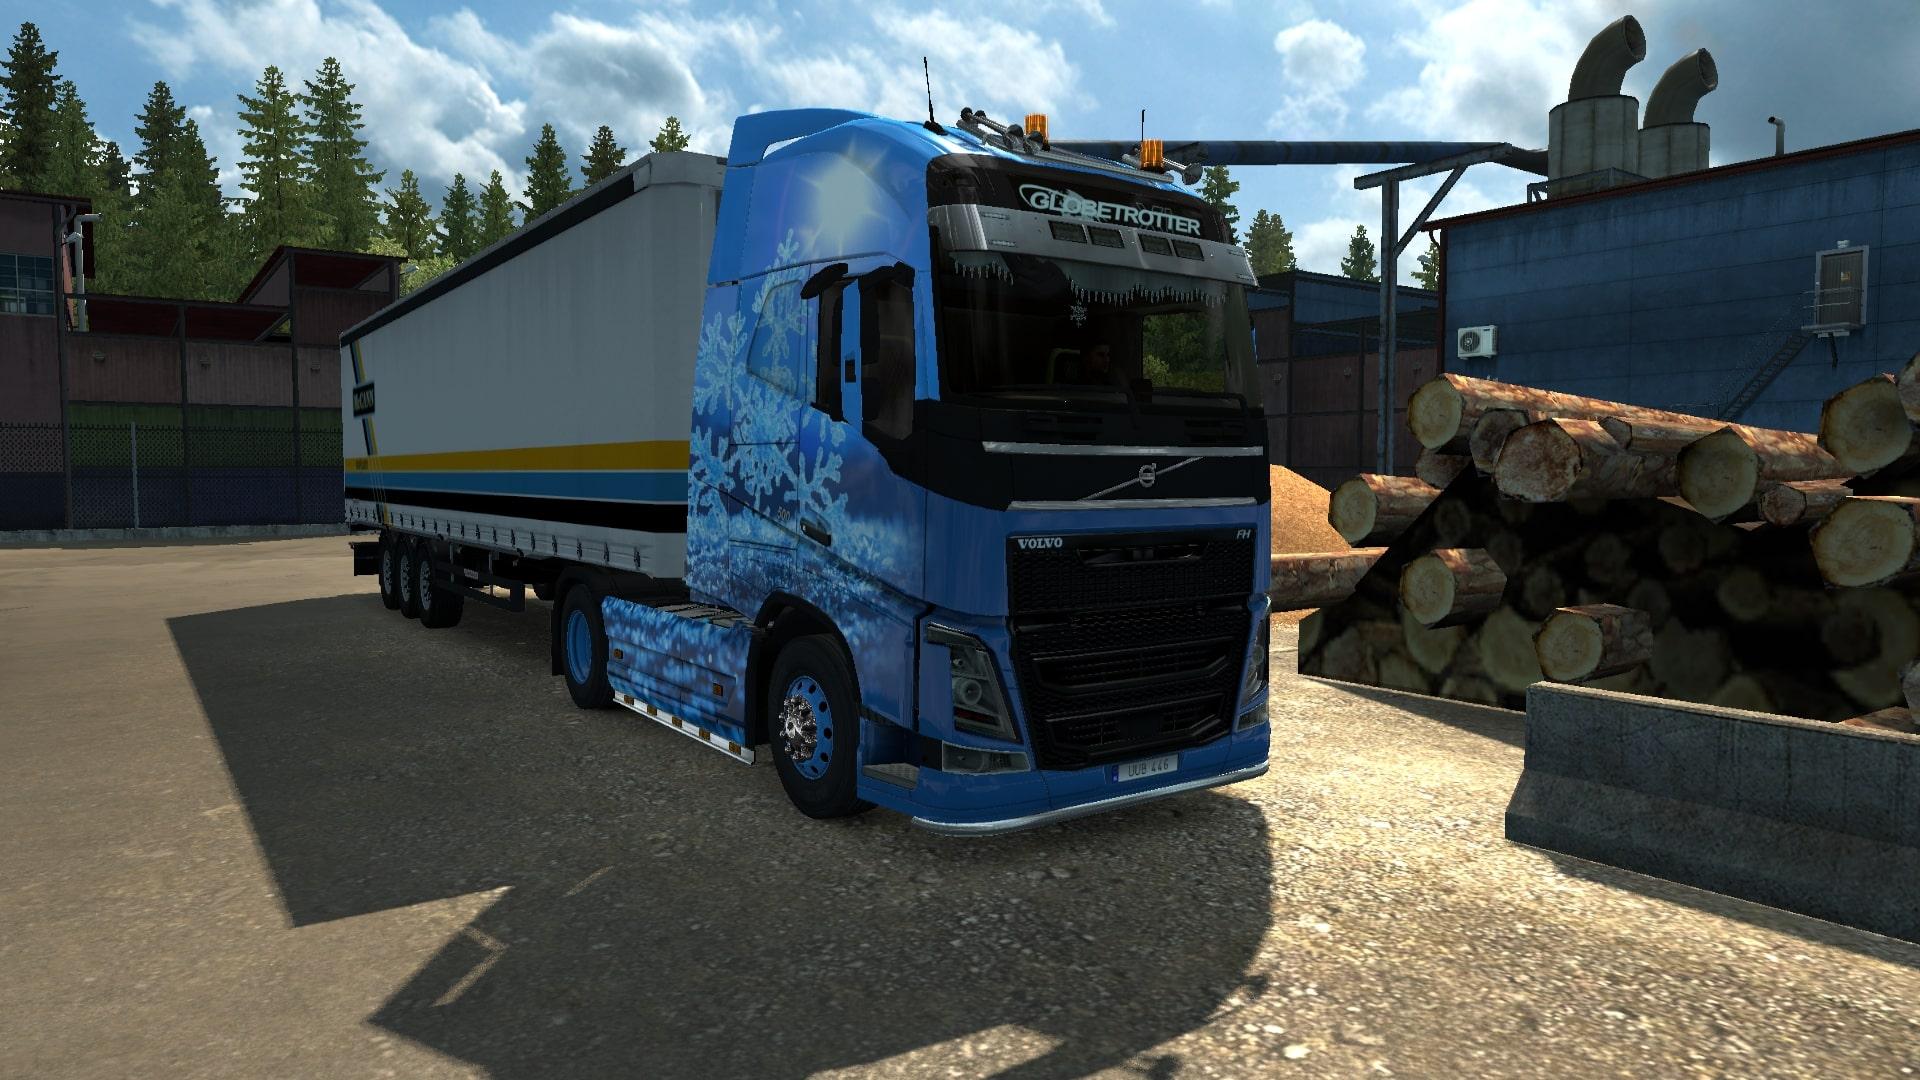 Wider choice of trucks in company orders v2.0 ets2